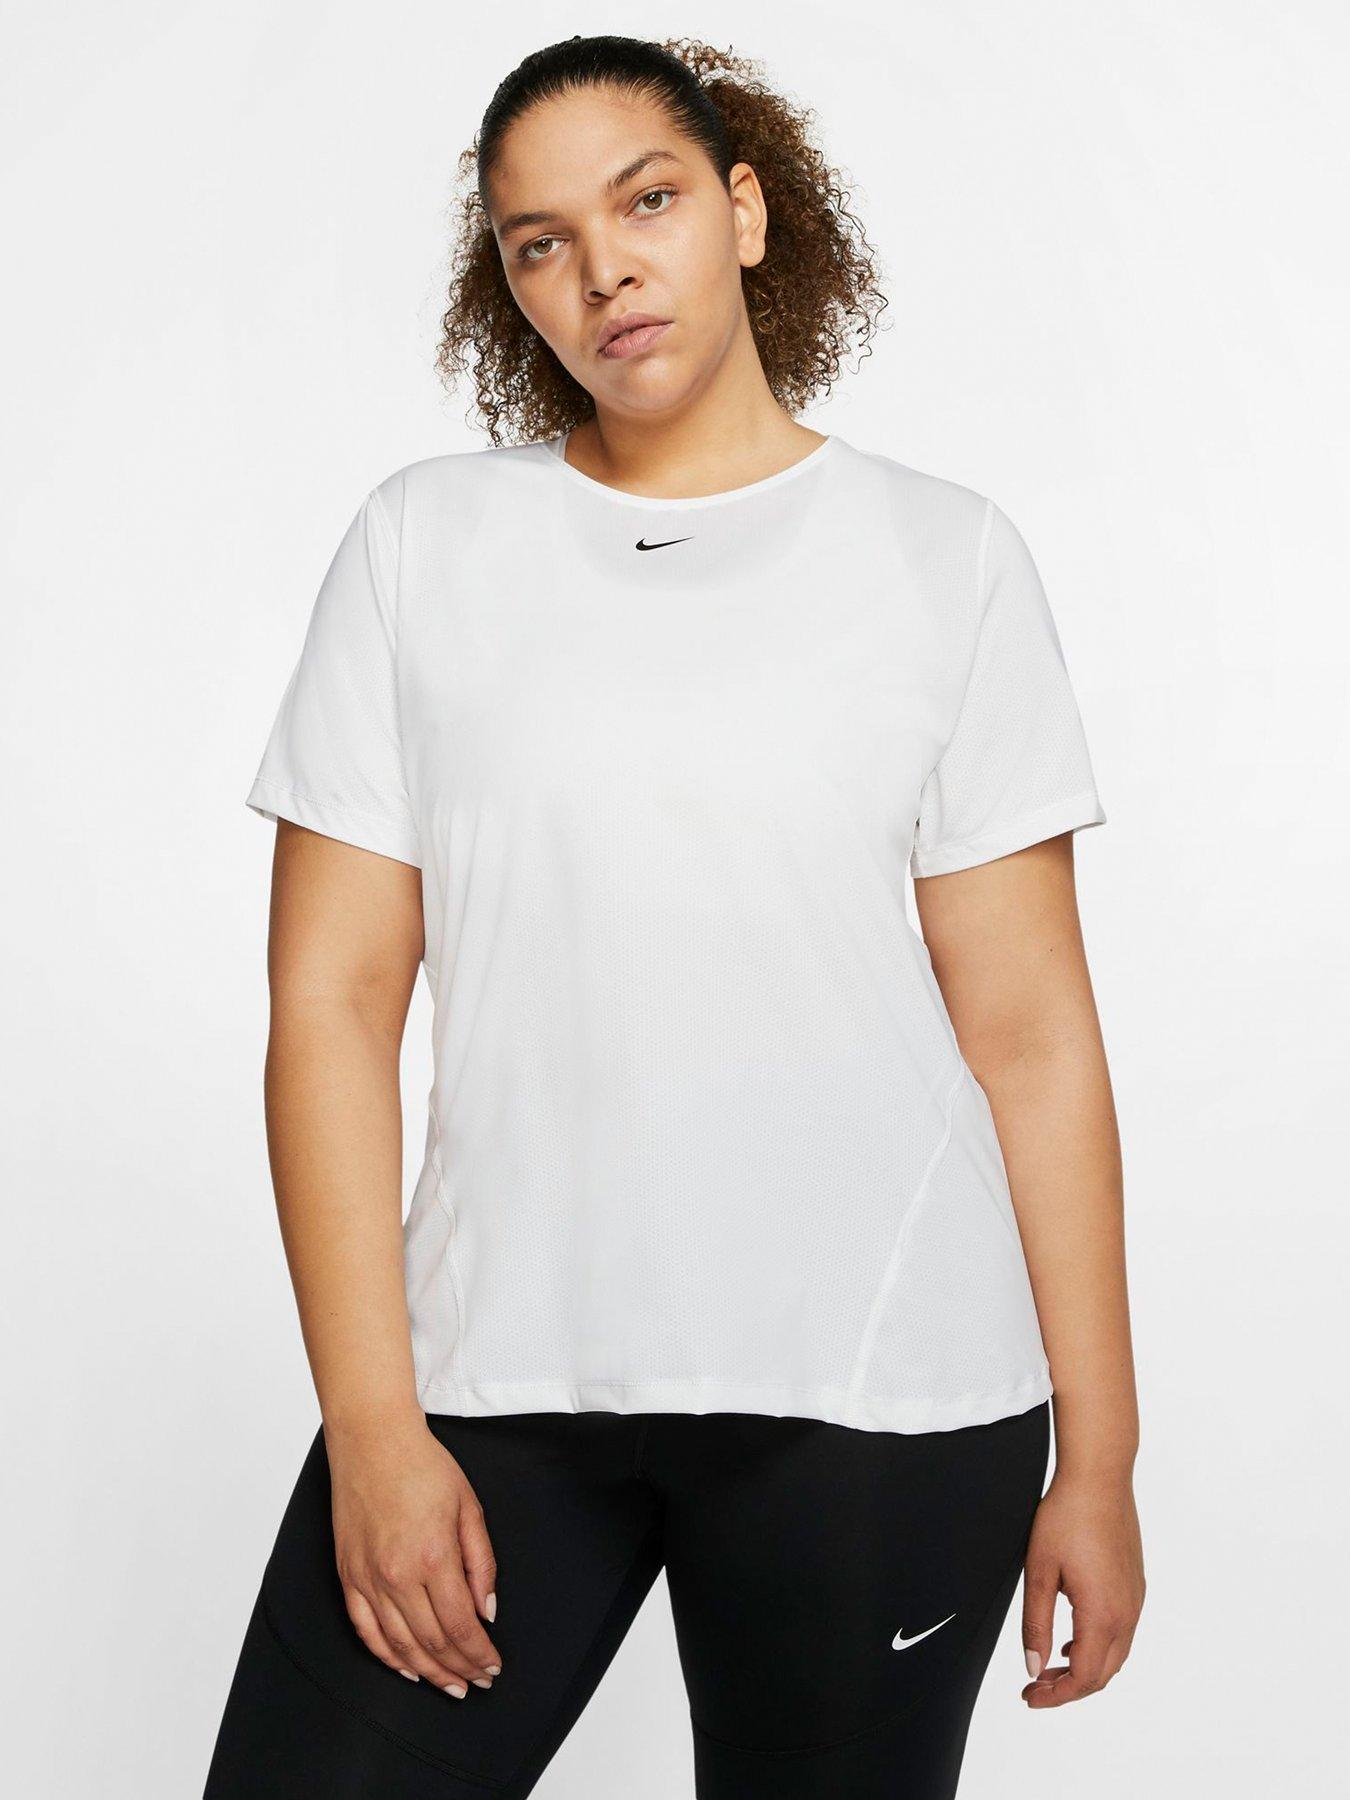  Pro Curve Training All Over Mesh T-Shirt - White